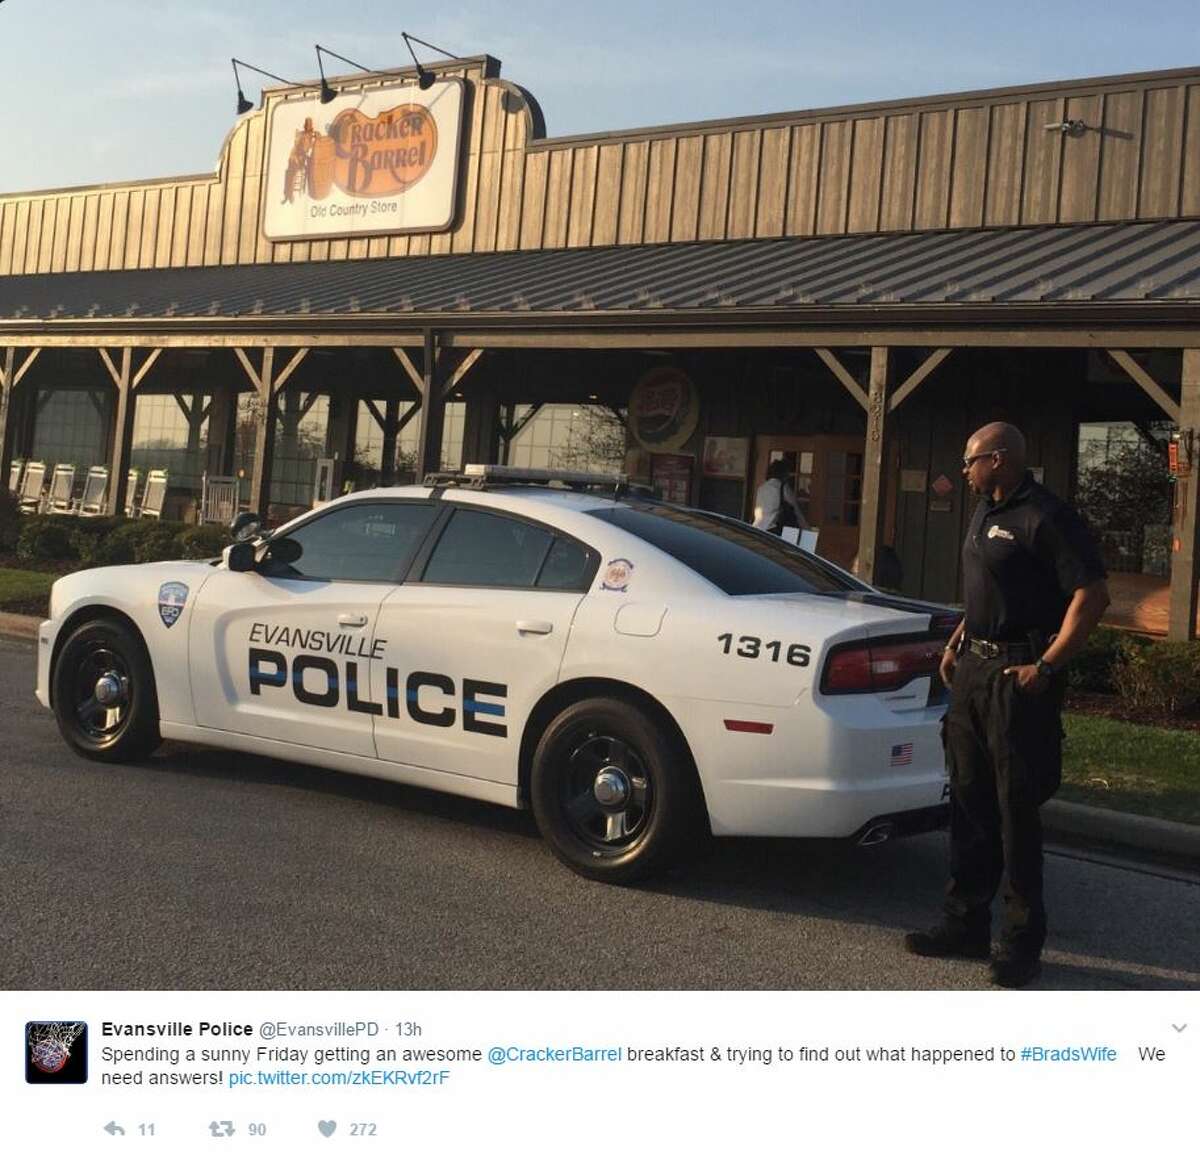 @EvansvillePD: Spending a sunny Friday getting an awesome @CrackerBarrel breakfast & trying to find out what happened to #BradsWife. We need answers!